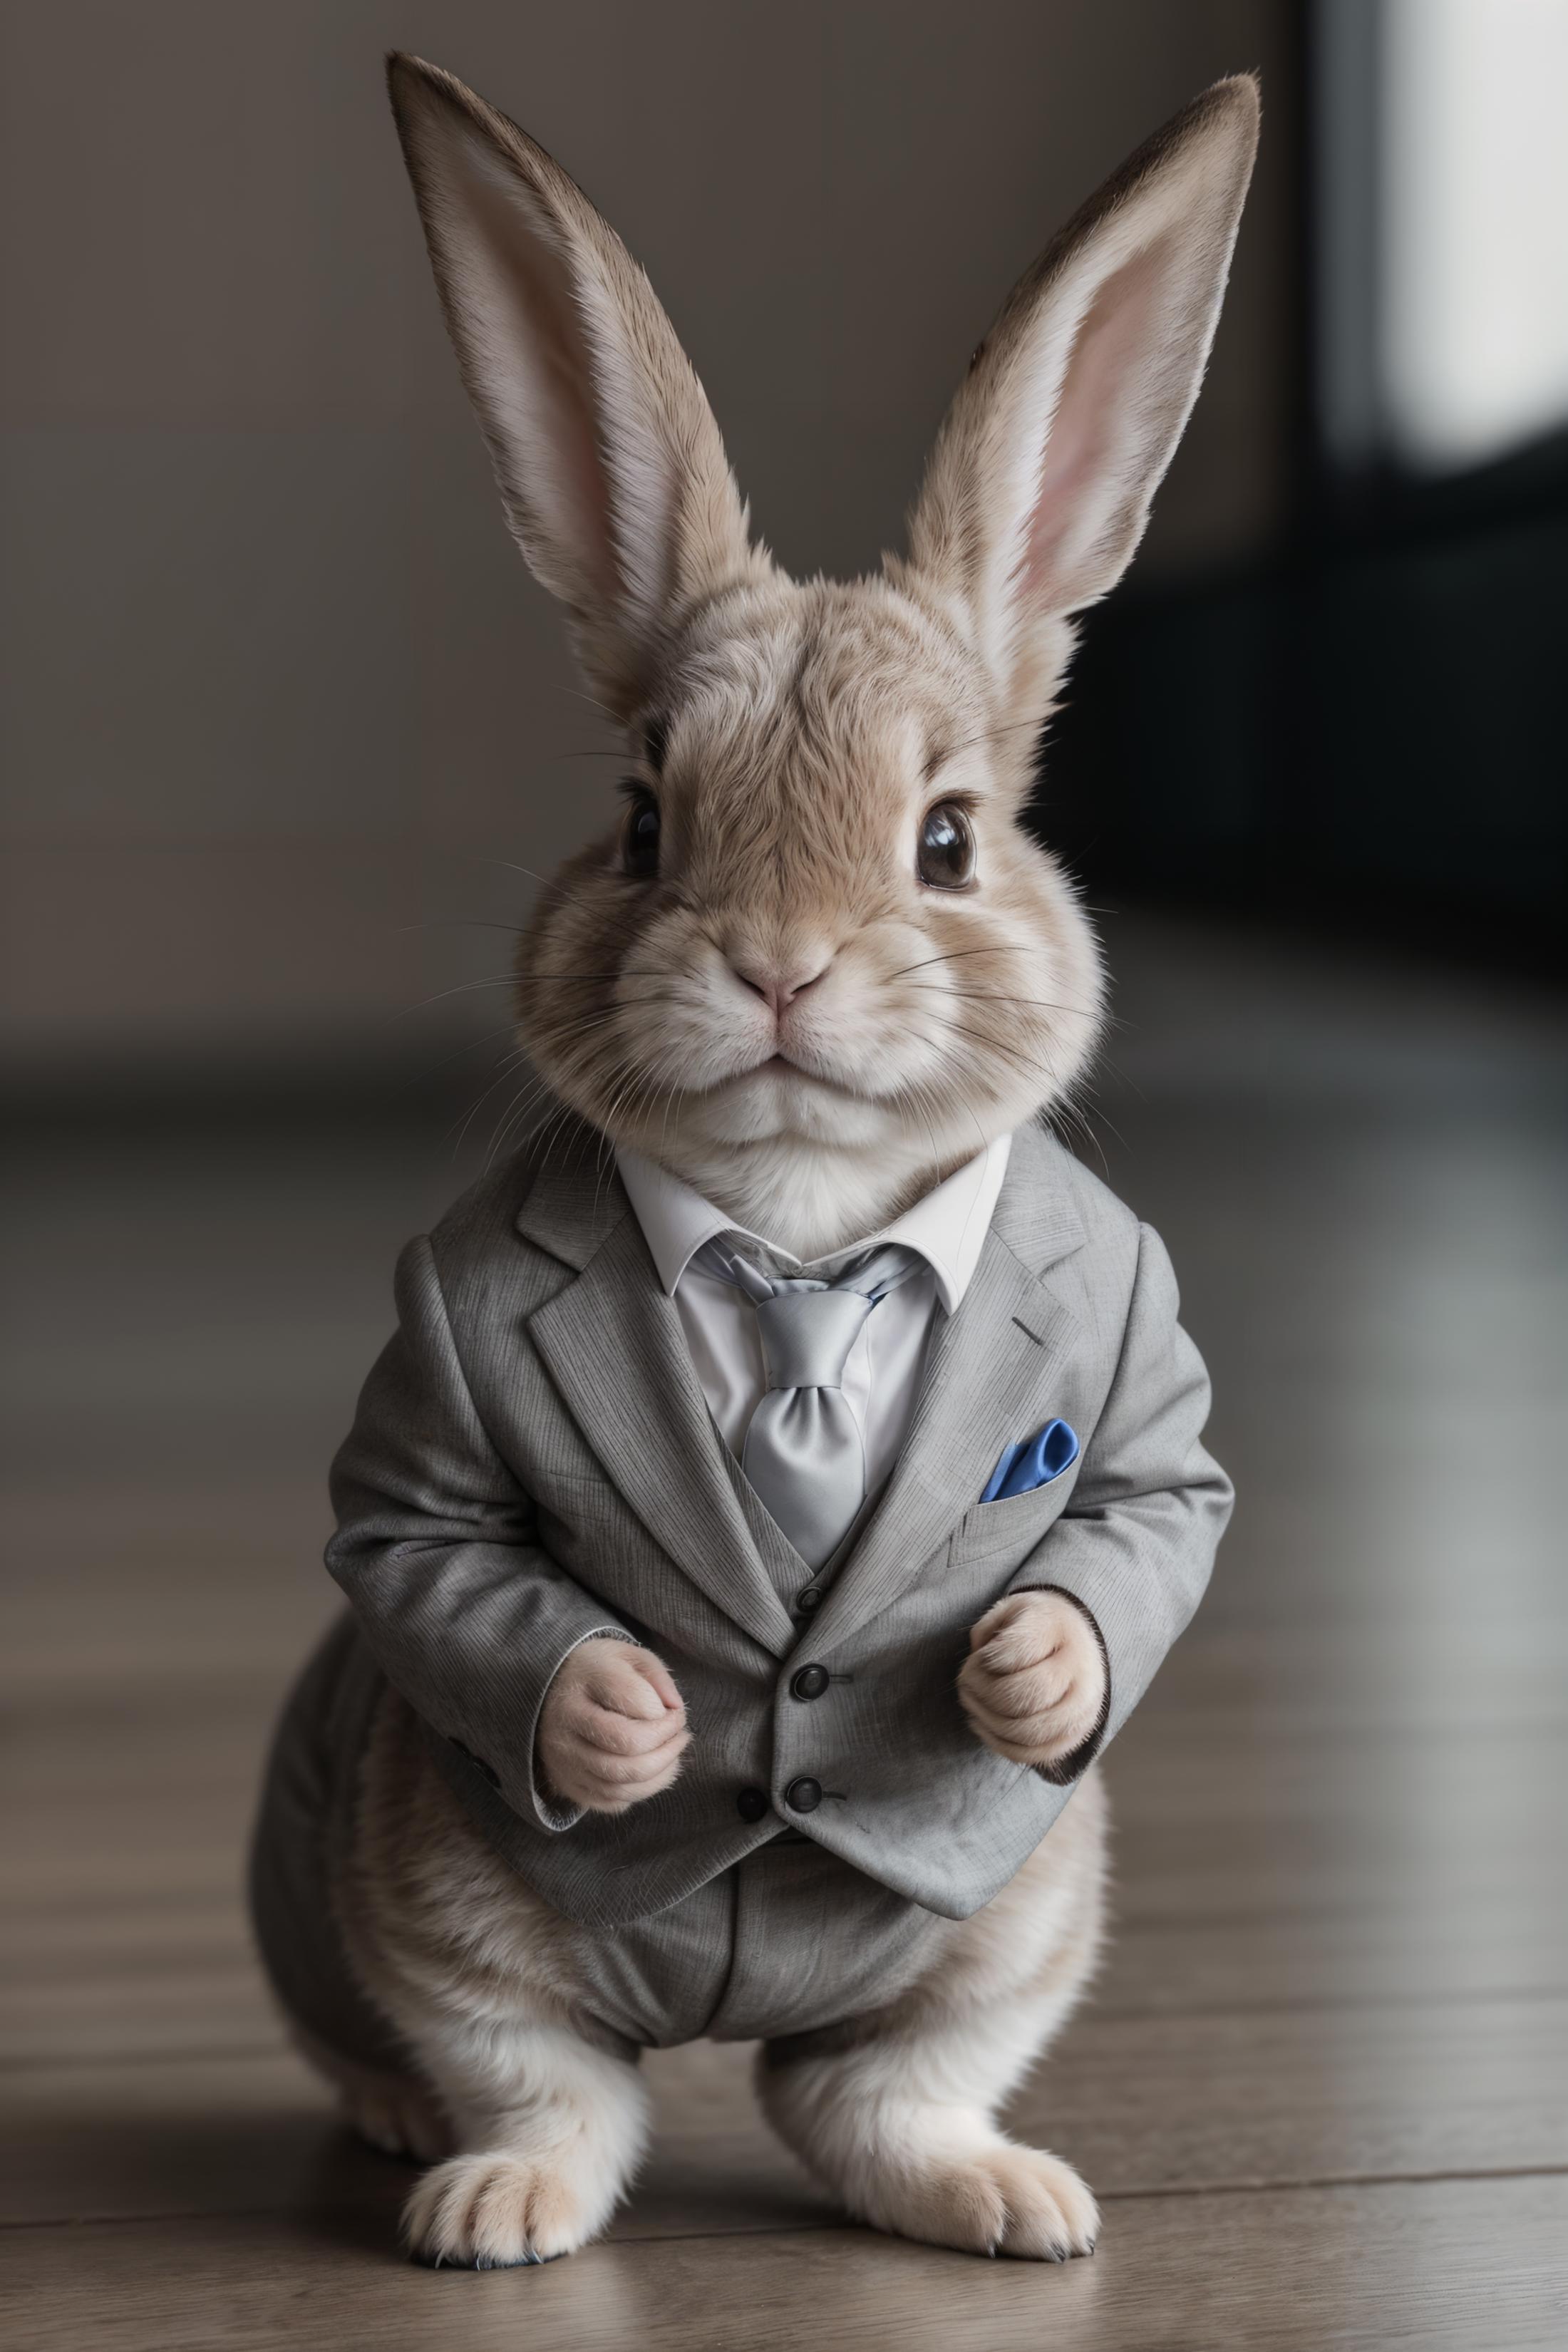 A small, well-dressed bunny in a gray suit and tie stands on a wooden floor.